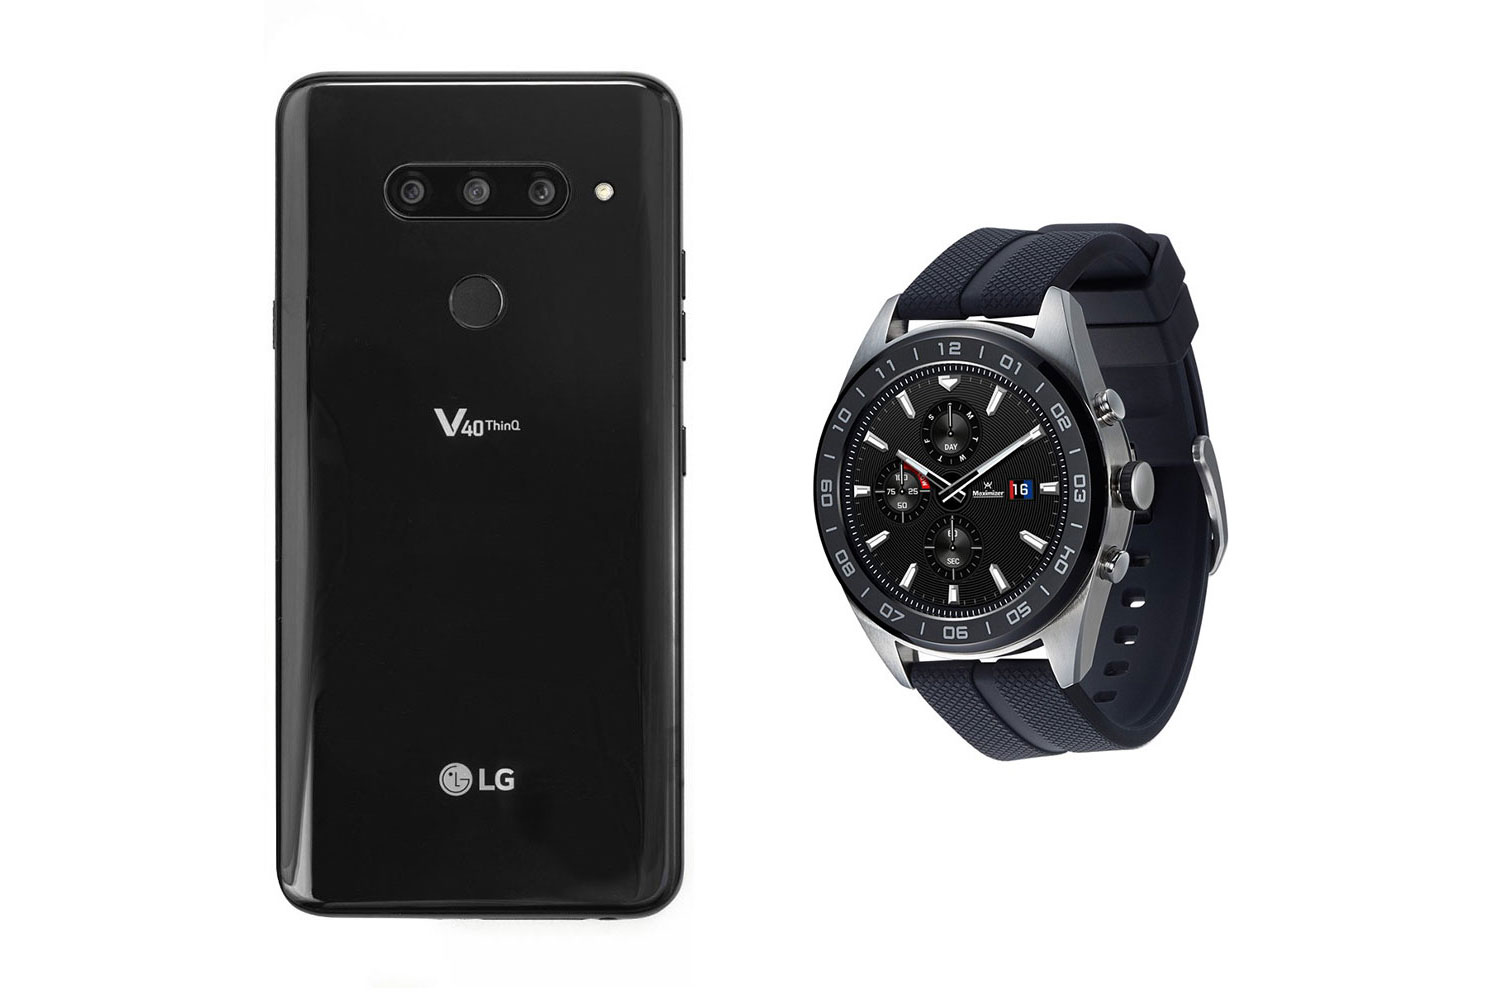 LG V40 ThinQ and LG Watch W7 Officially Announced